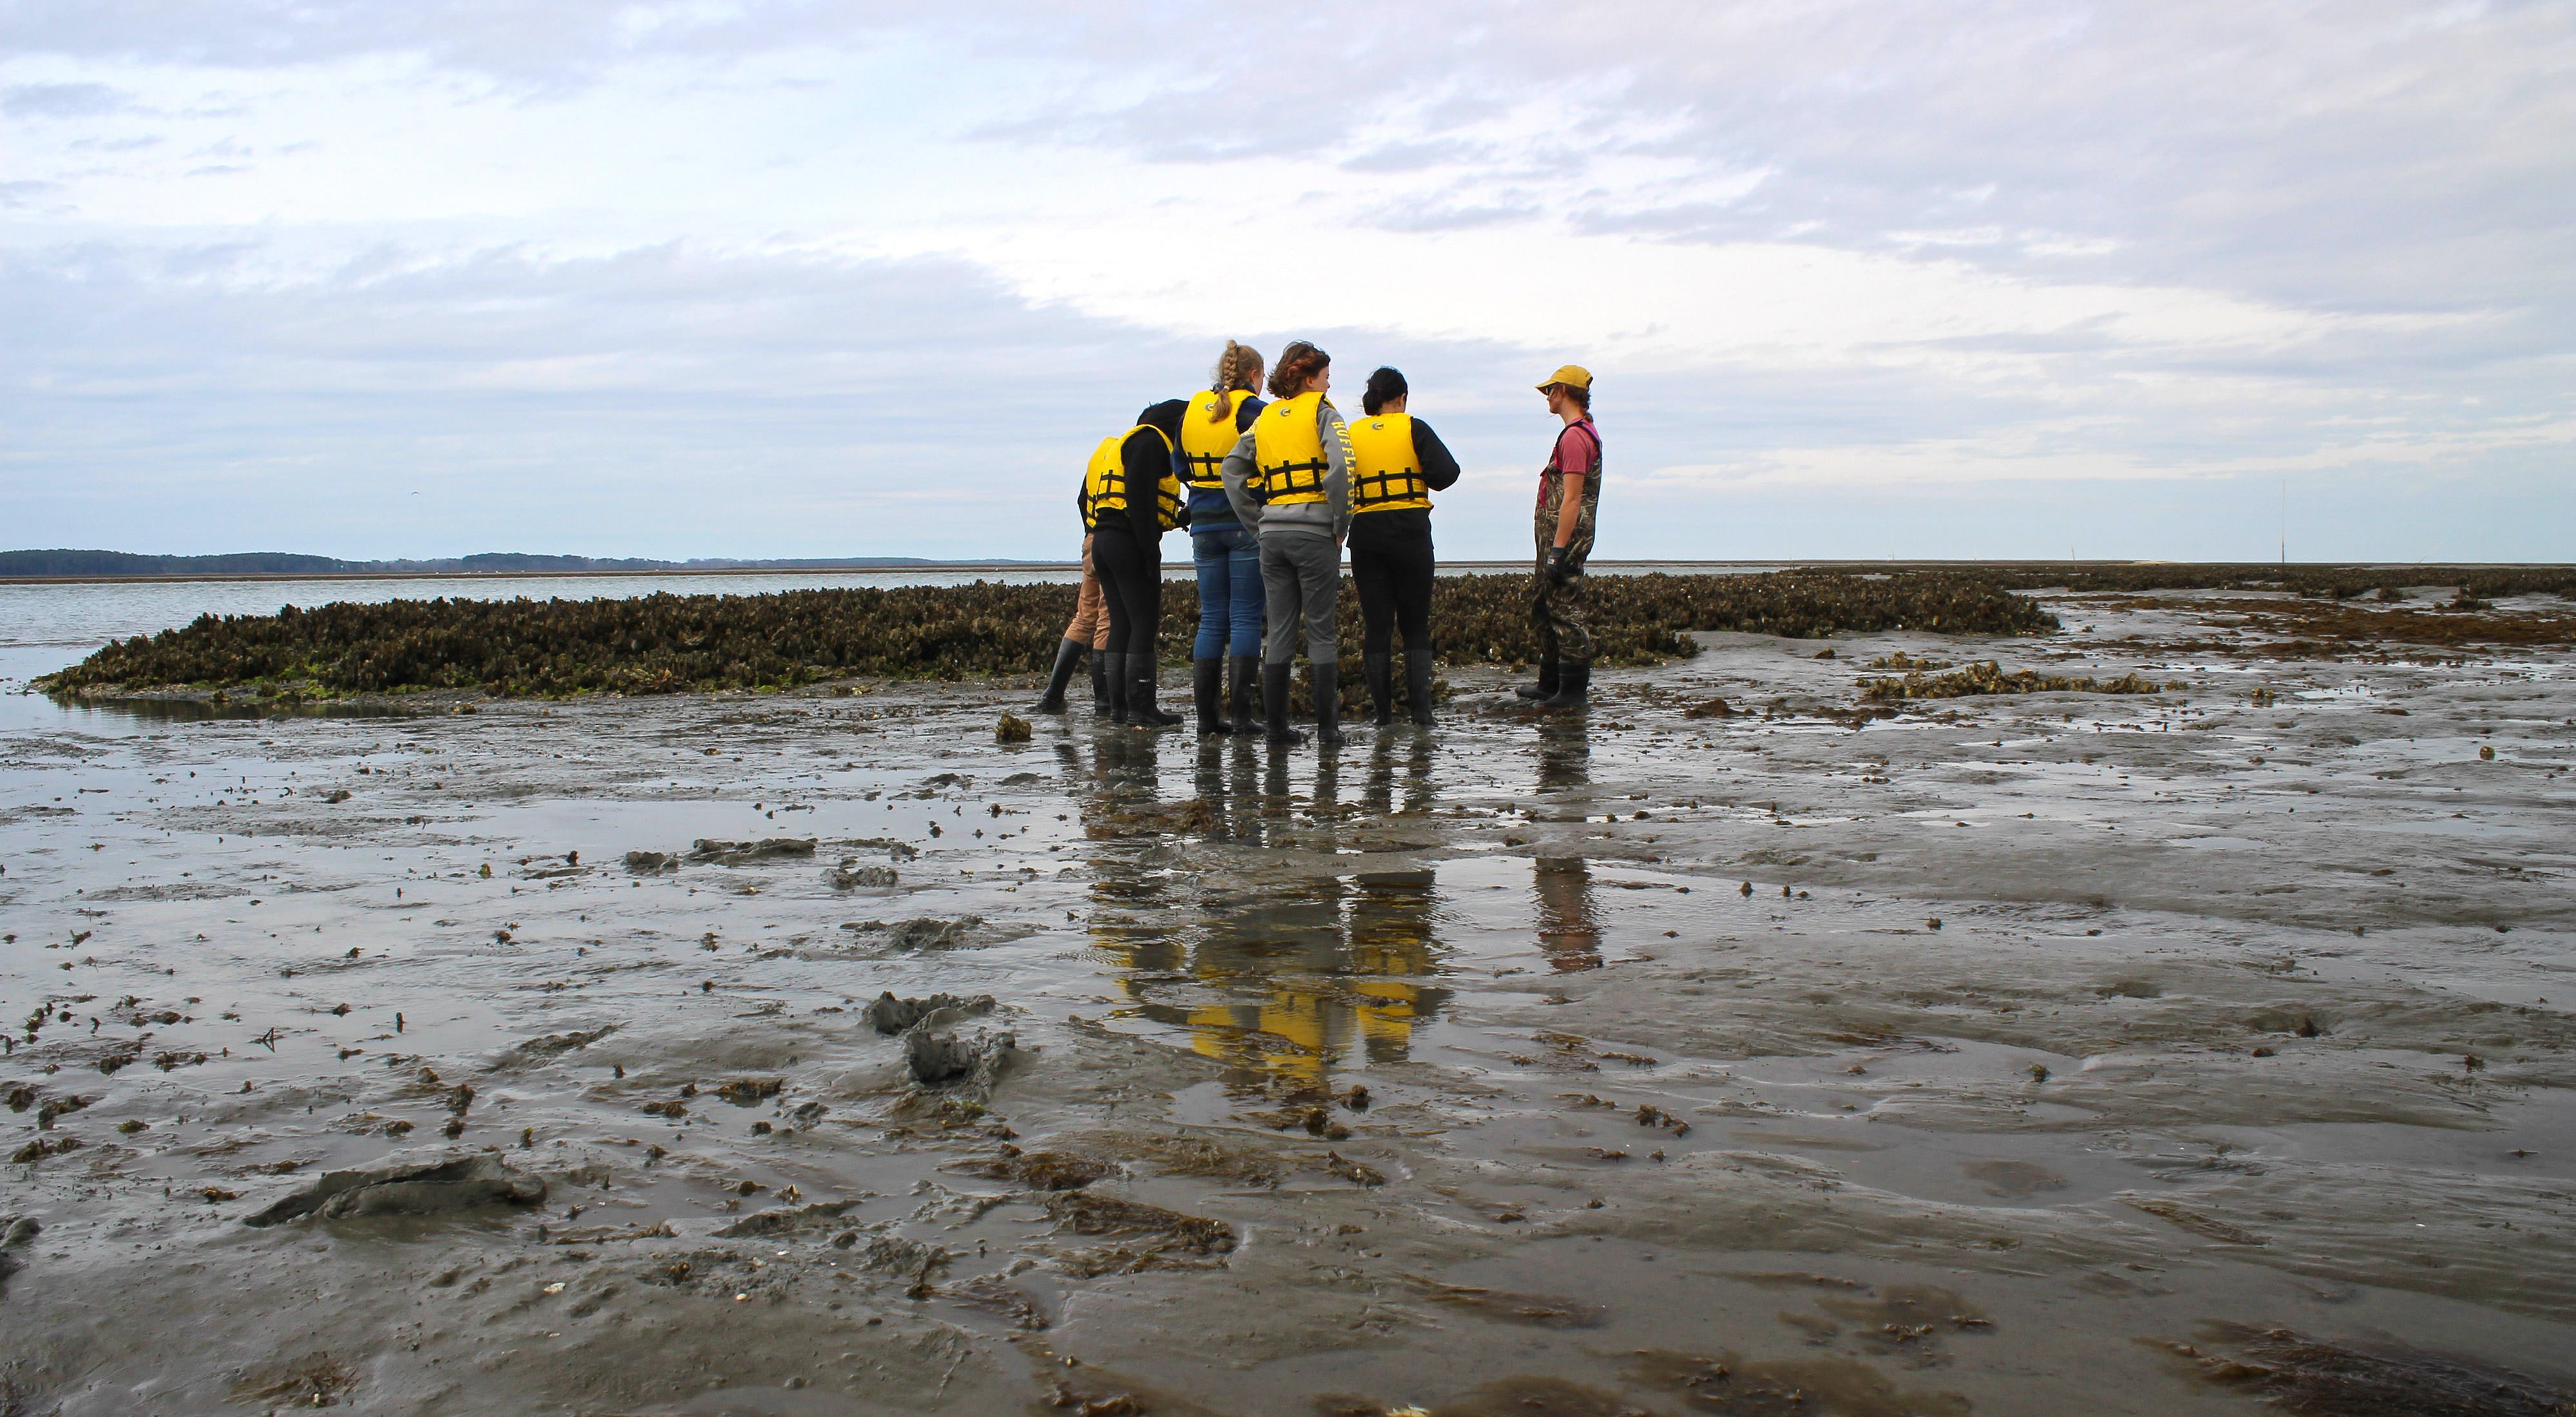 Five people stand together on a mud flat at low tide. A long row of exposed oyster reef stretches behind them.